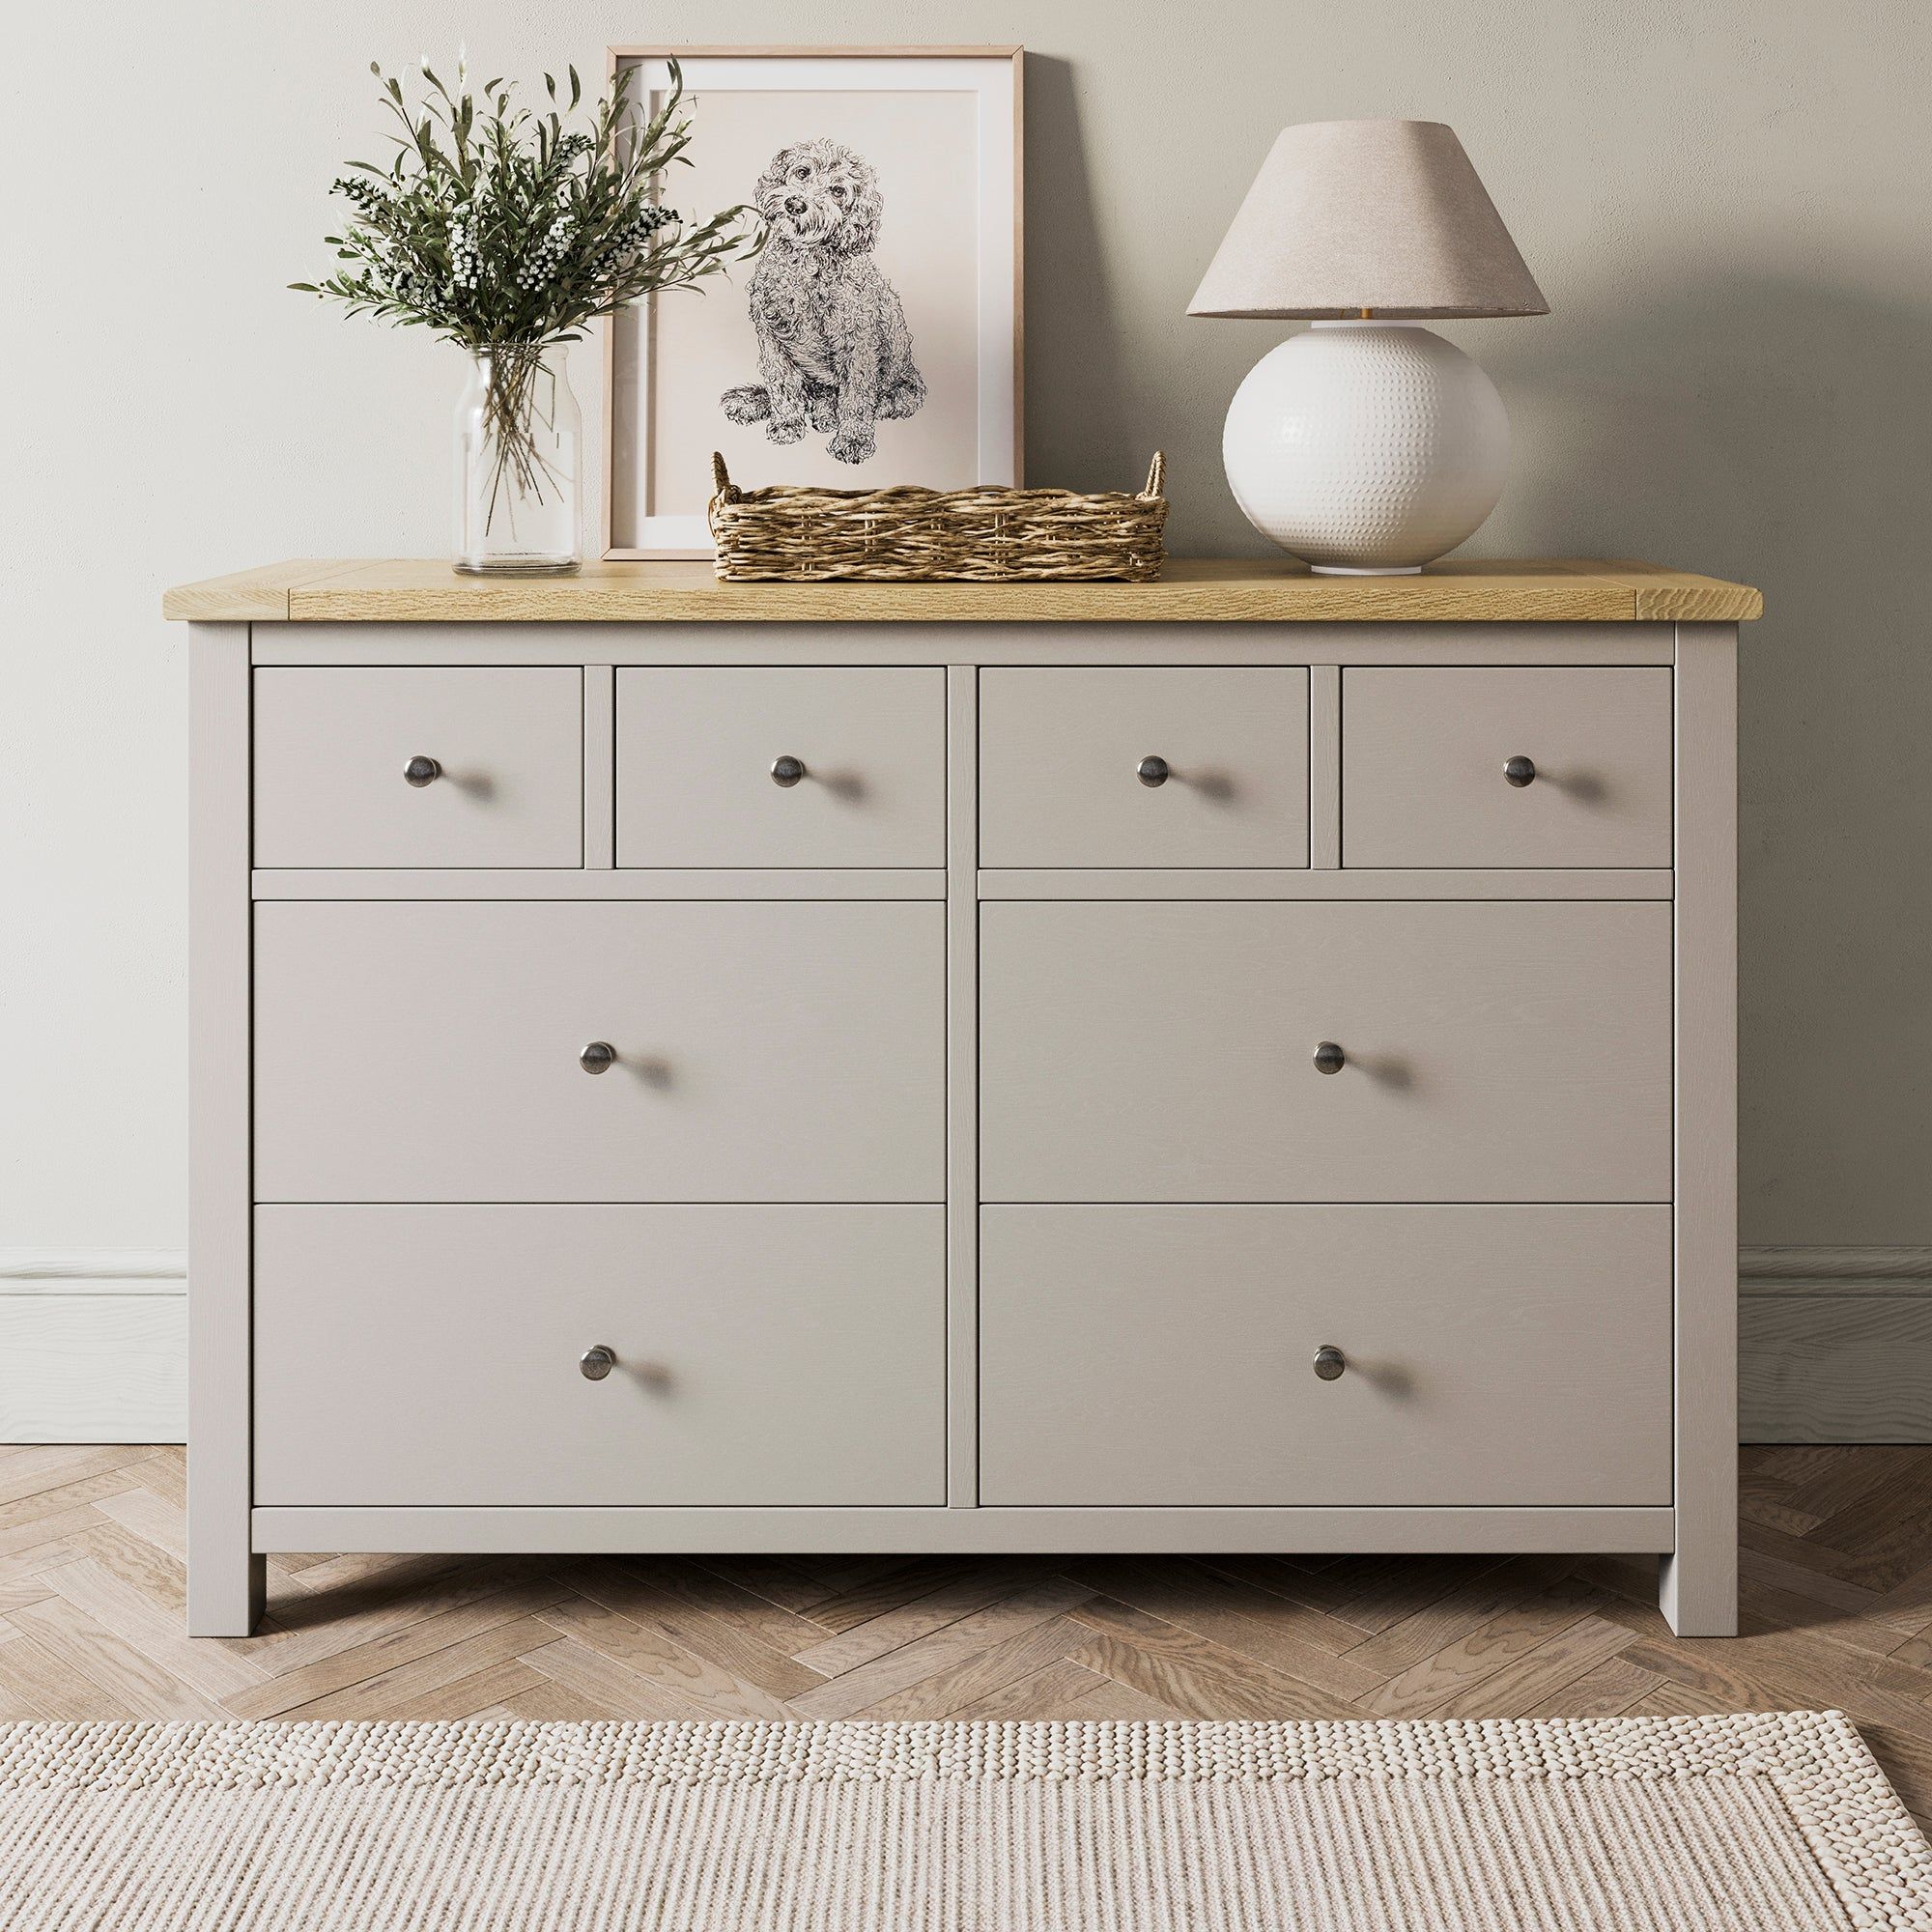 Chest Of Drawers For Room : The Ultimate Storage Solution Chest of Drawers for Your Room